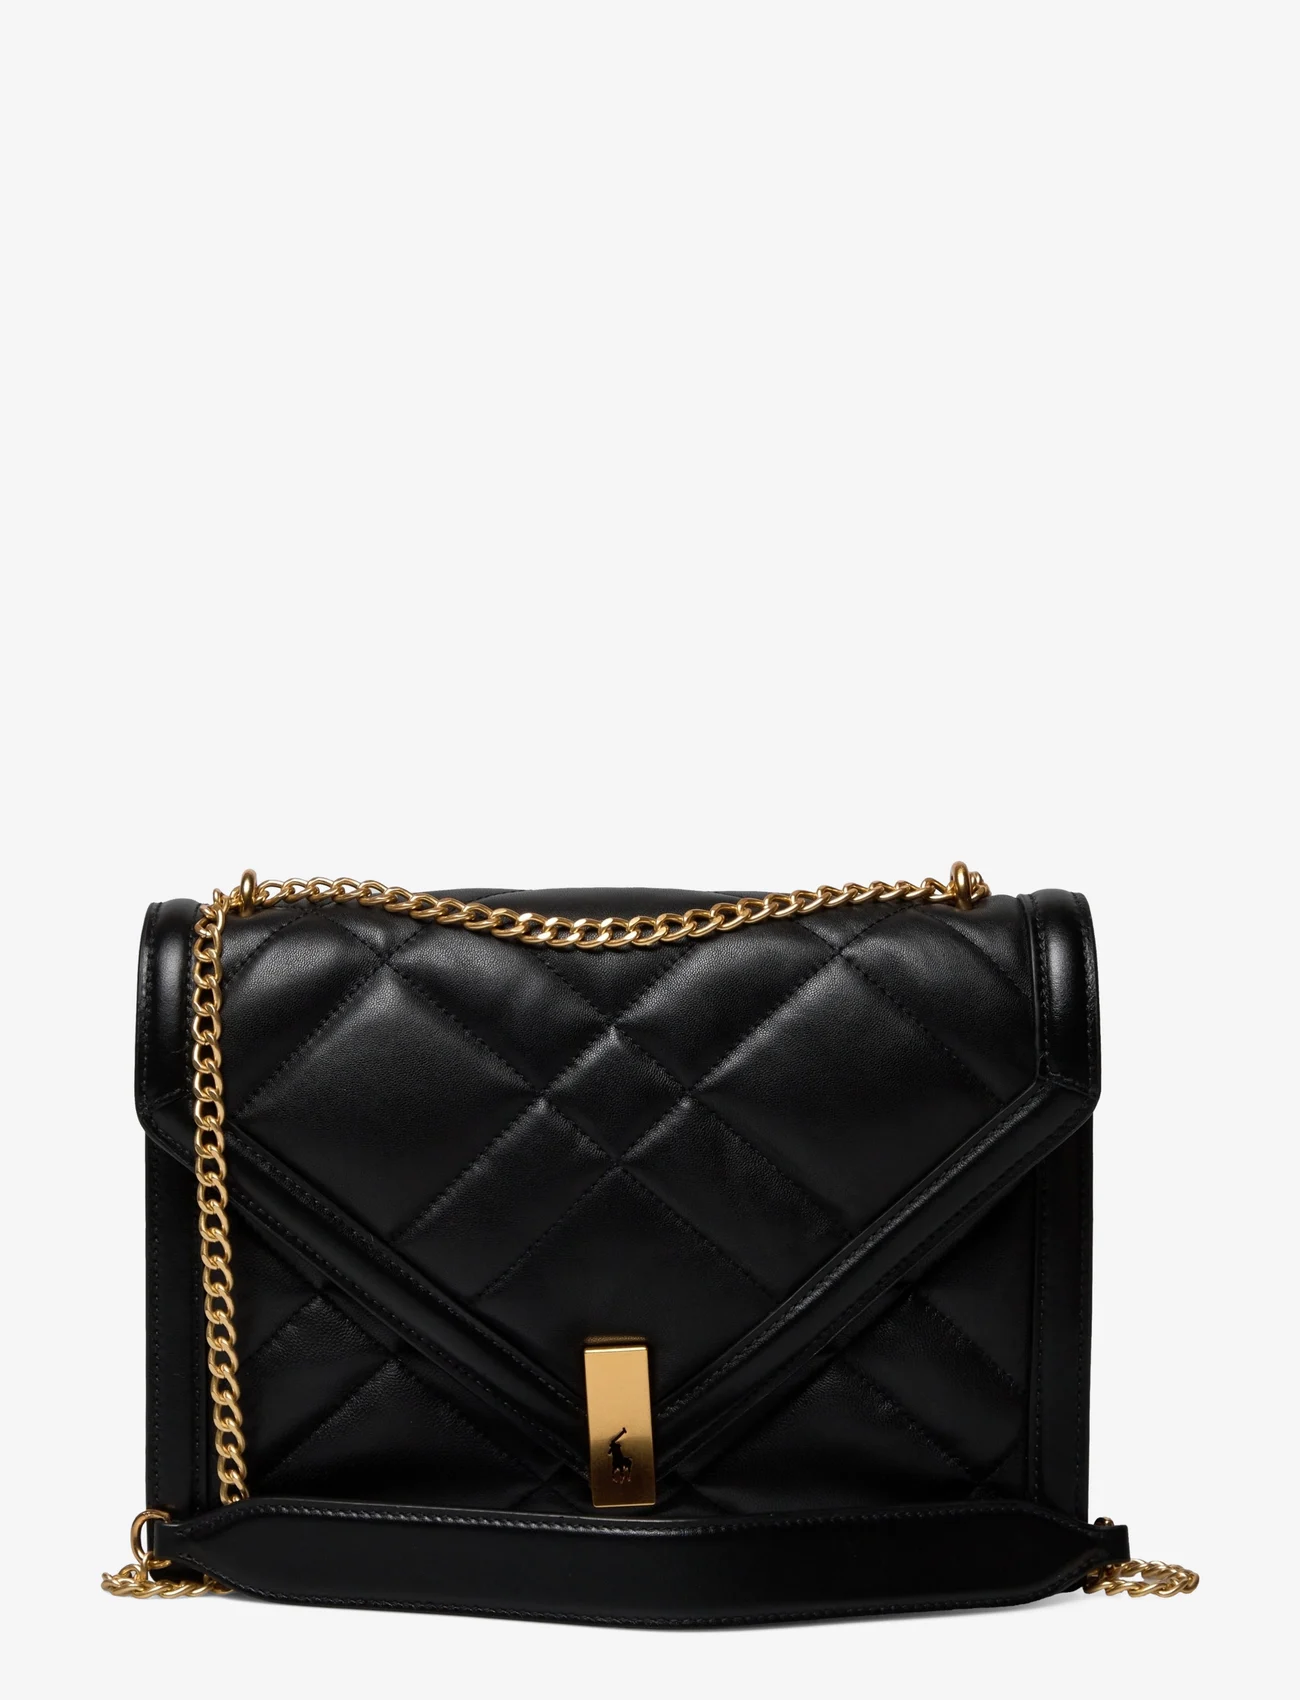 Polo Ralph Lauren Polo Quilted Leather Envelope Bag - Crossbody - Boozt.com